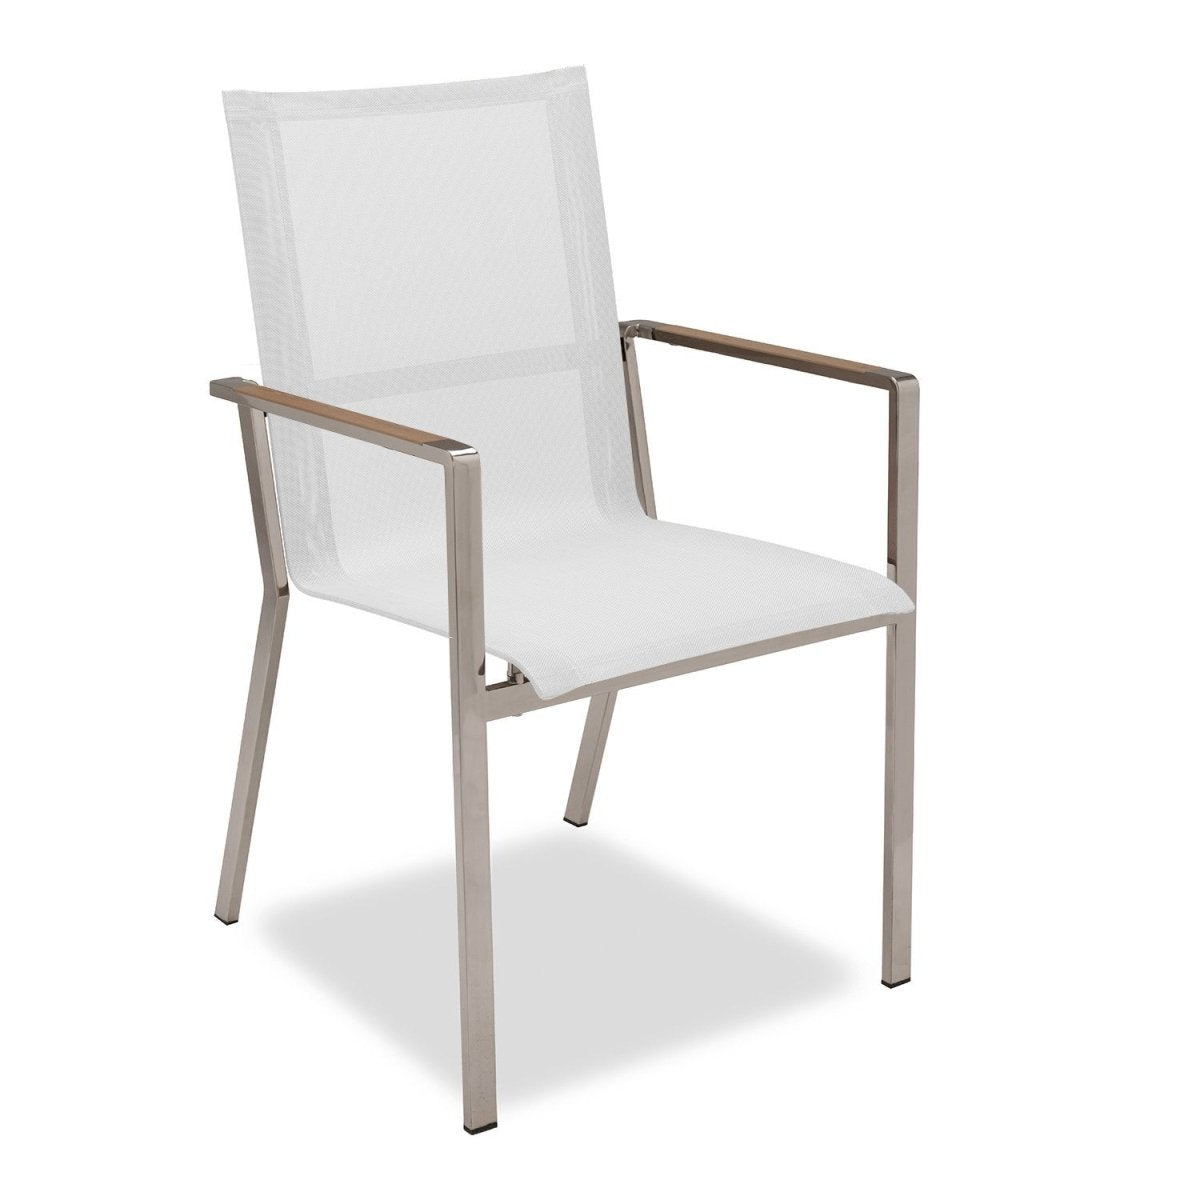 Lucerne Carver Chair in white with Teak inlays